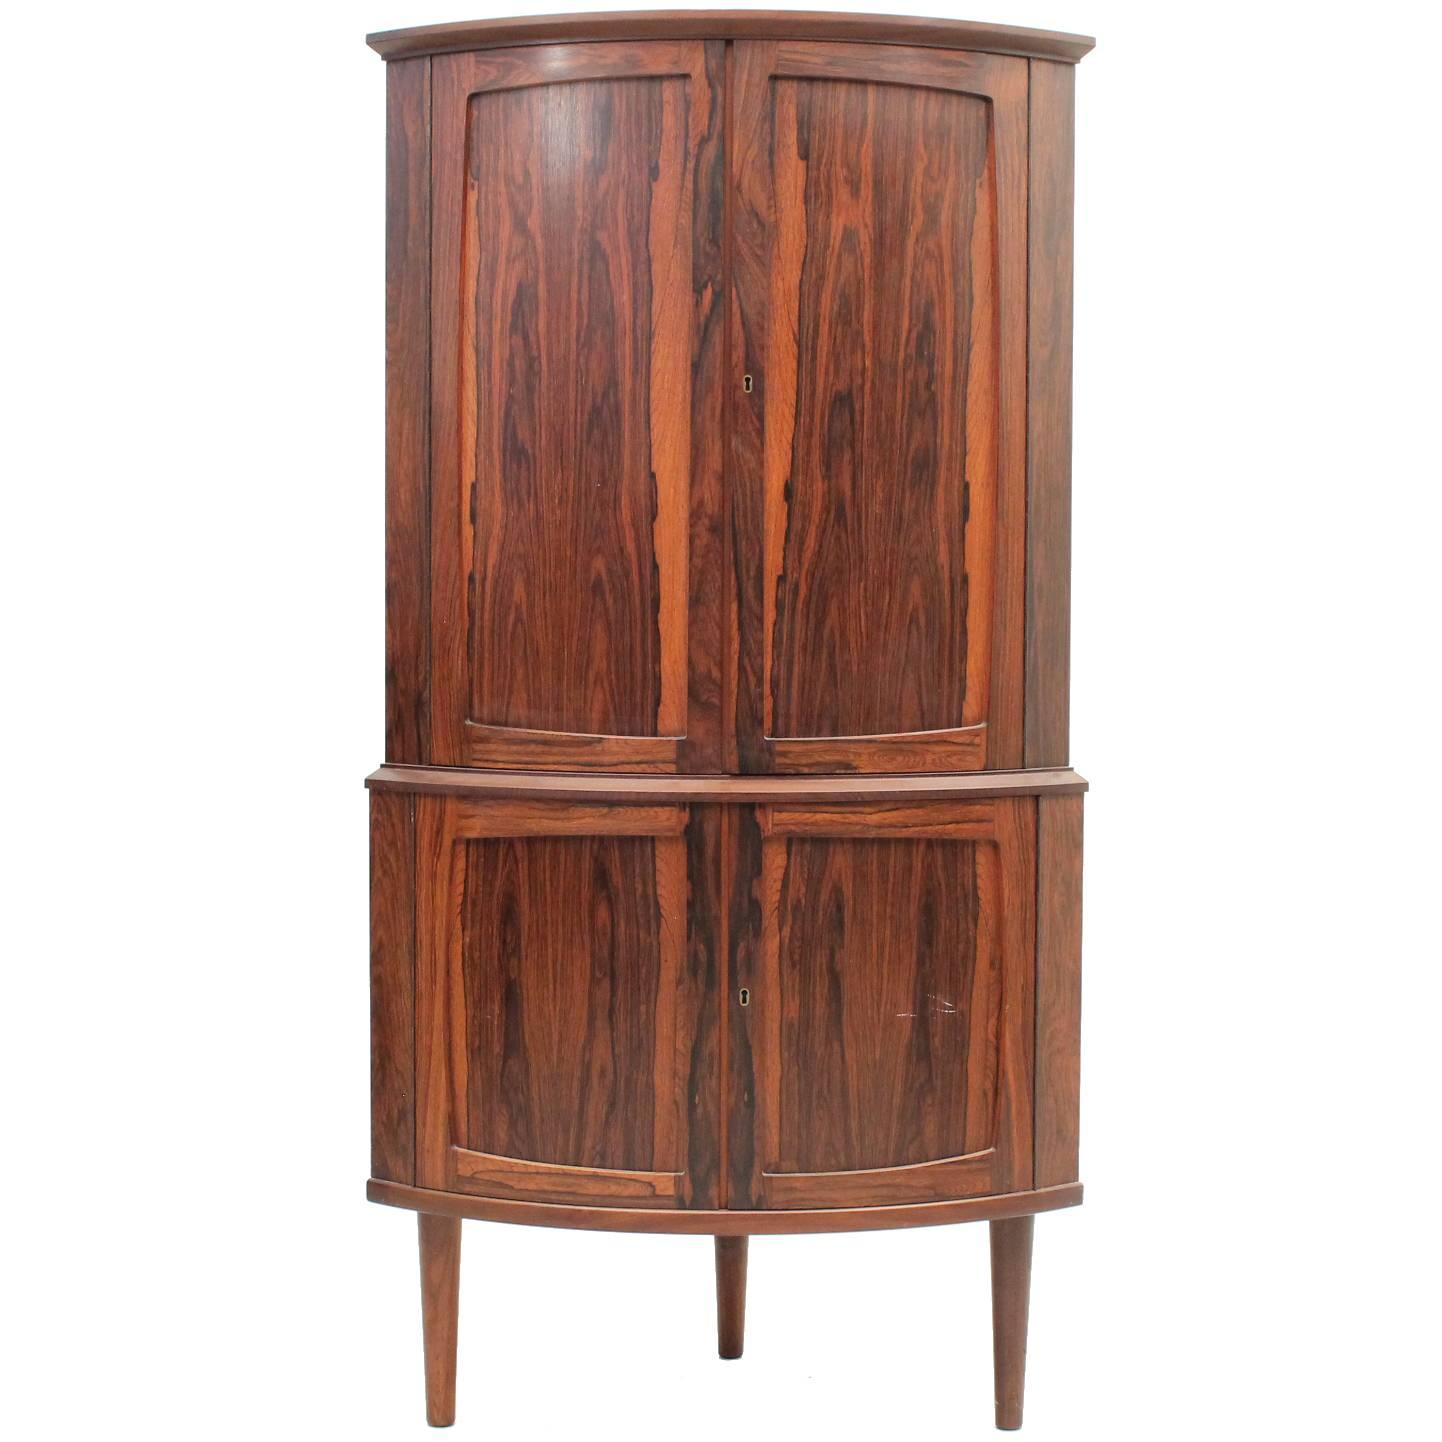 Rosewood Corner Cabinet with Two Storage Sections, Danish, Mid-Century Modern